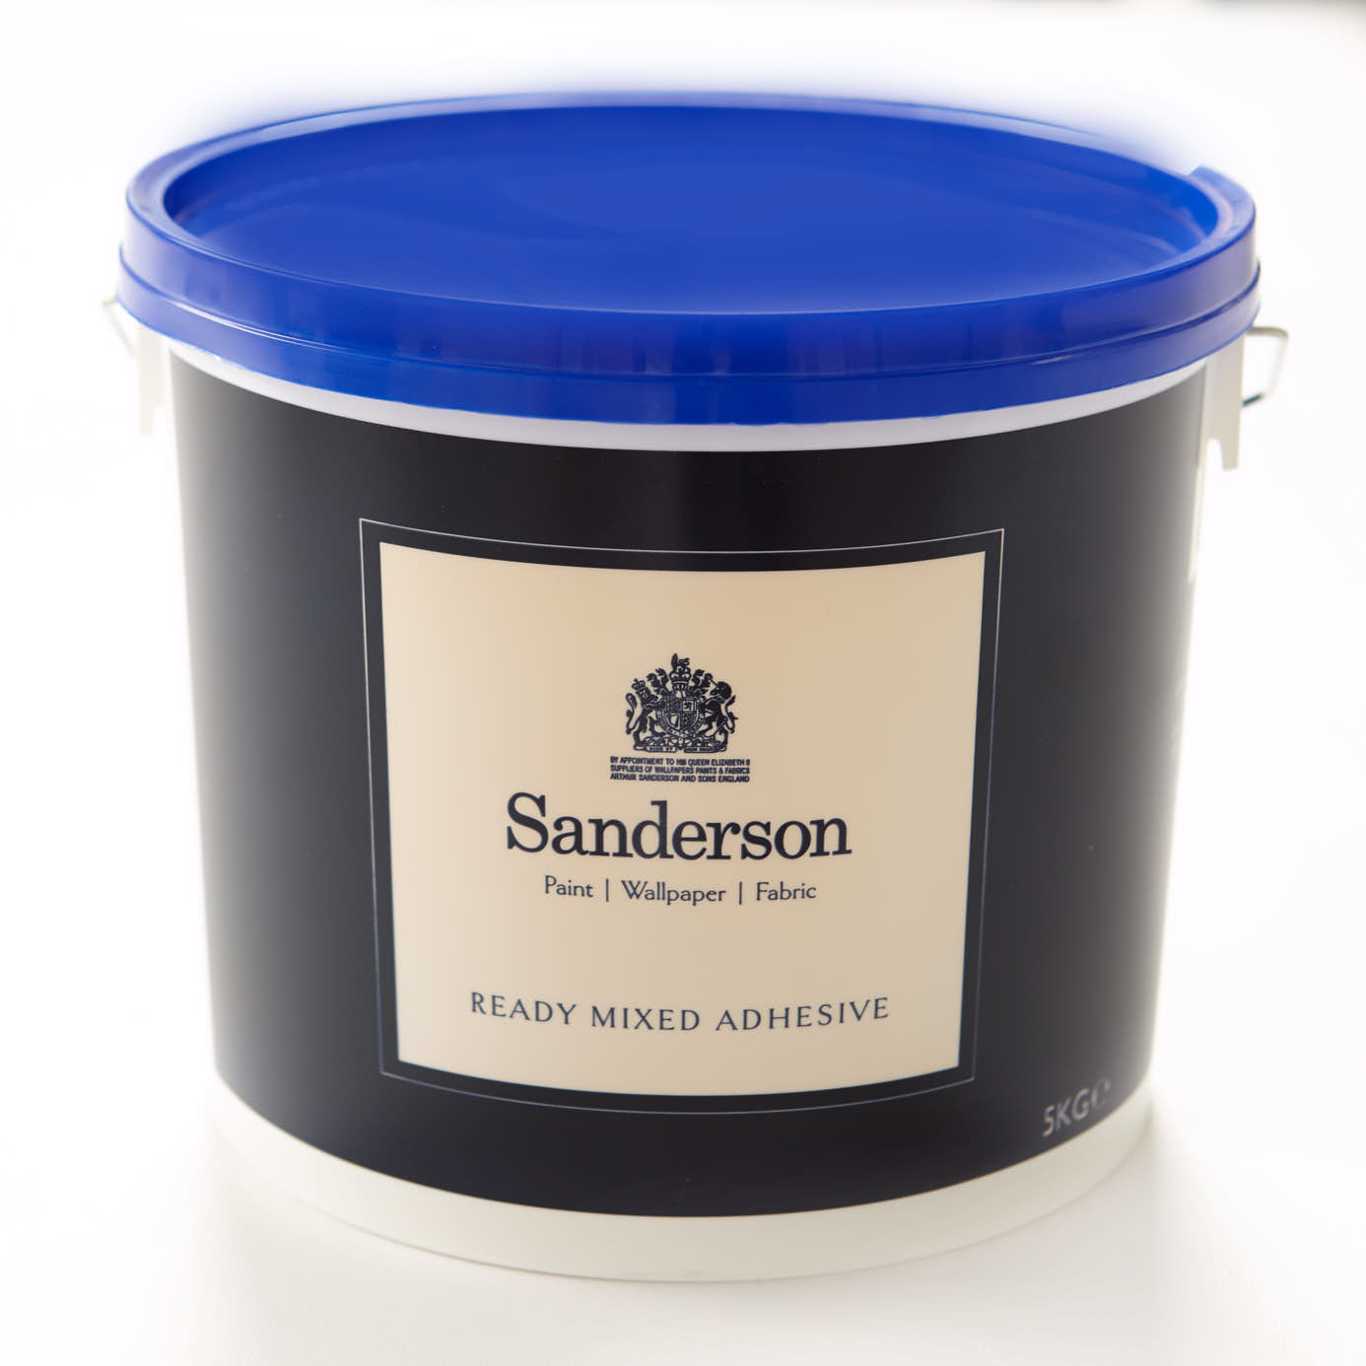 Sanderson Paste Not Applicable Adhesive by SAN